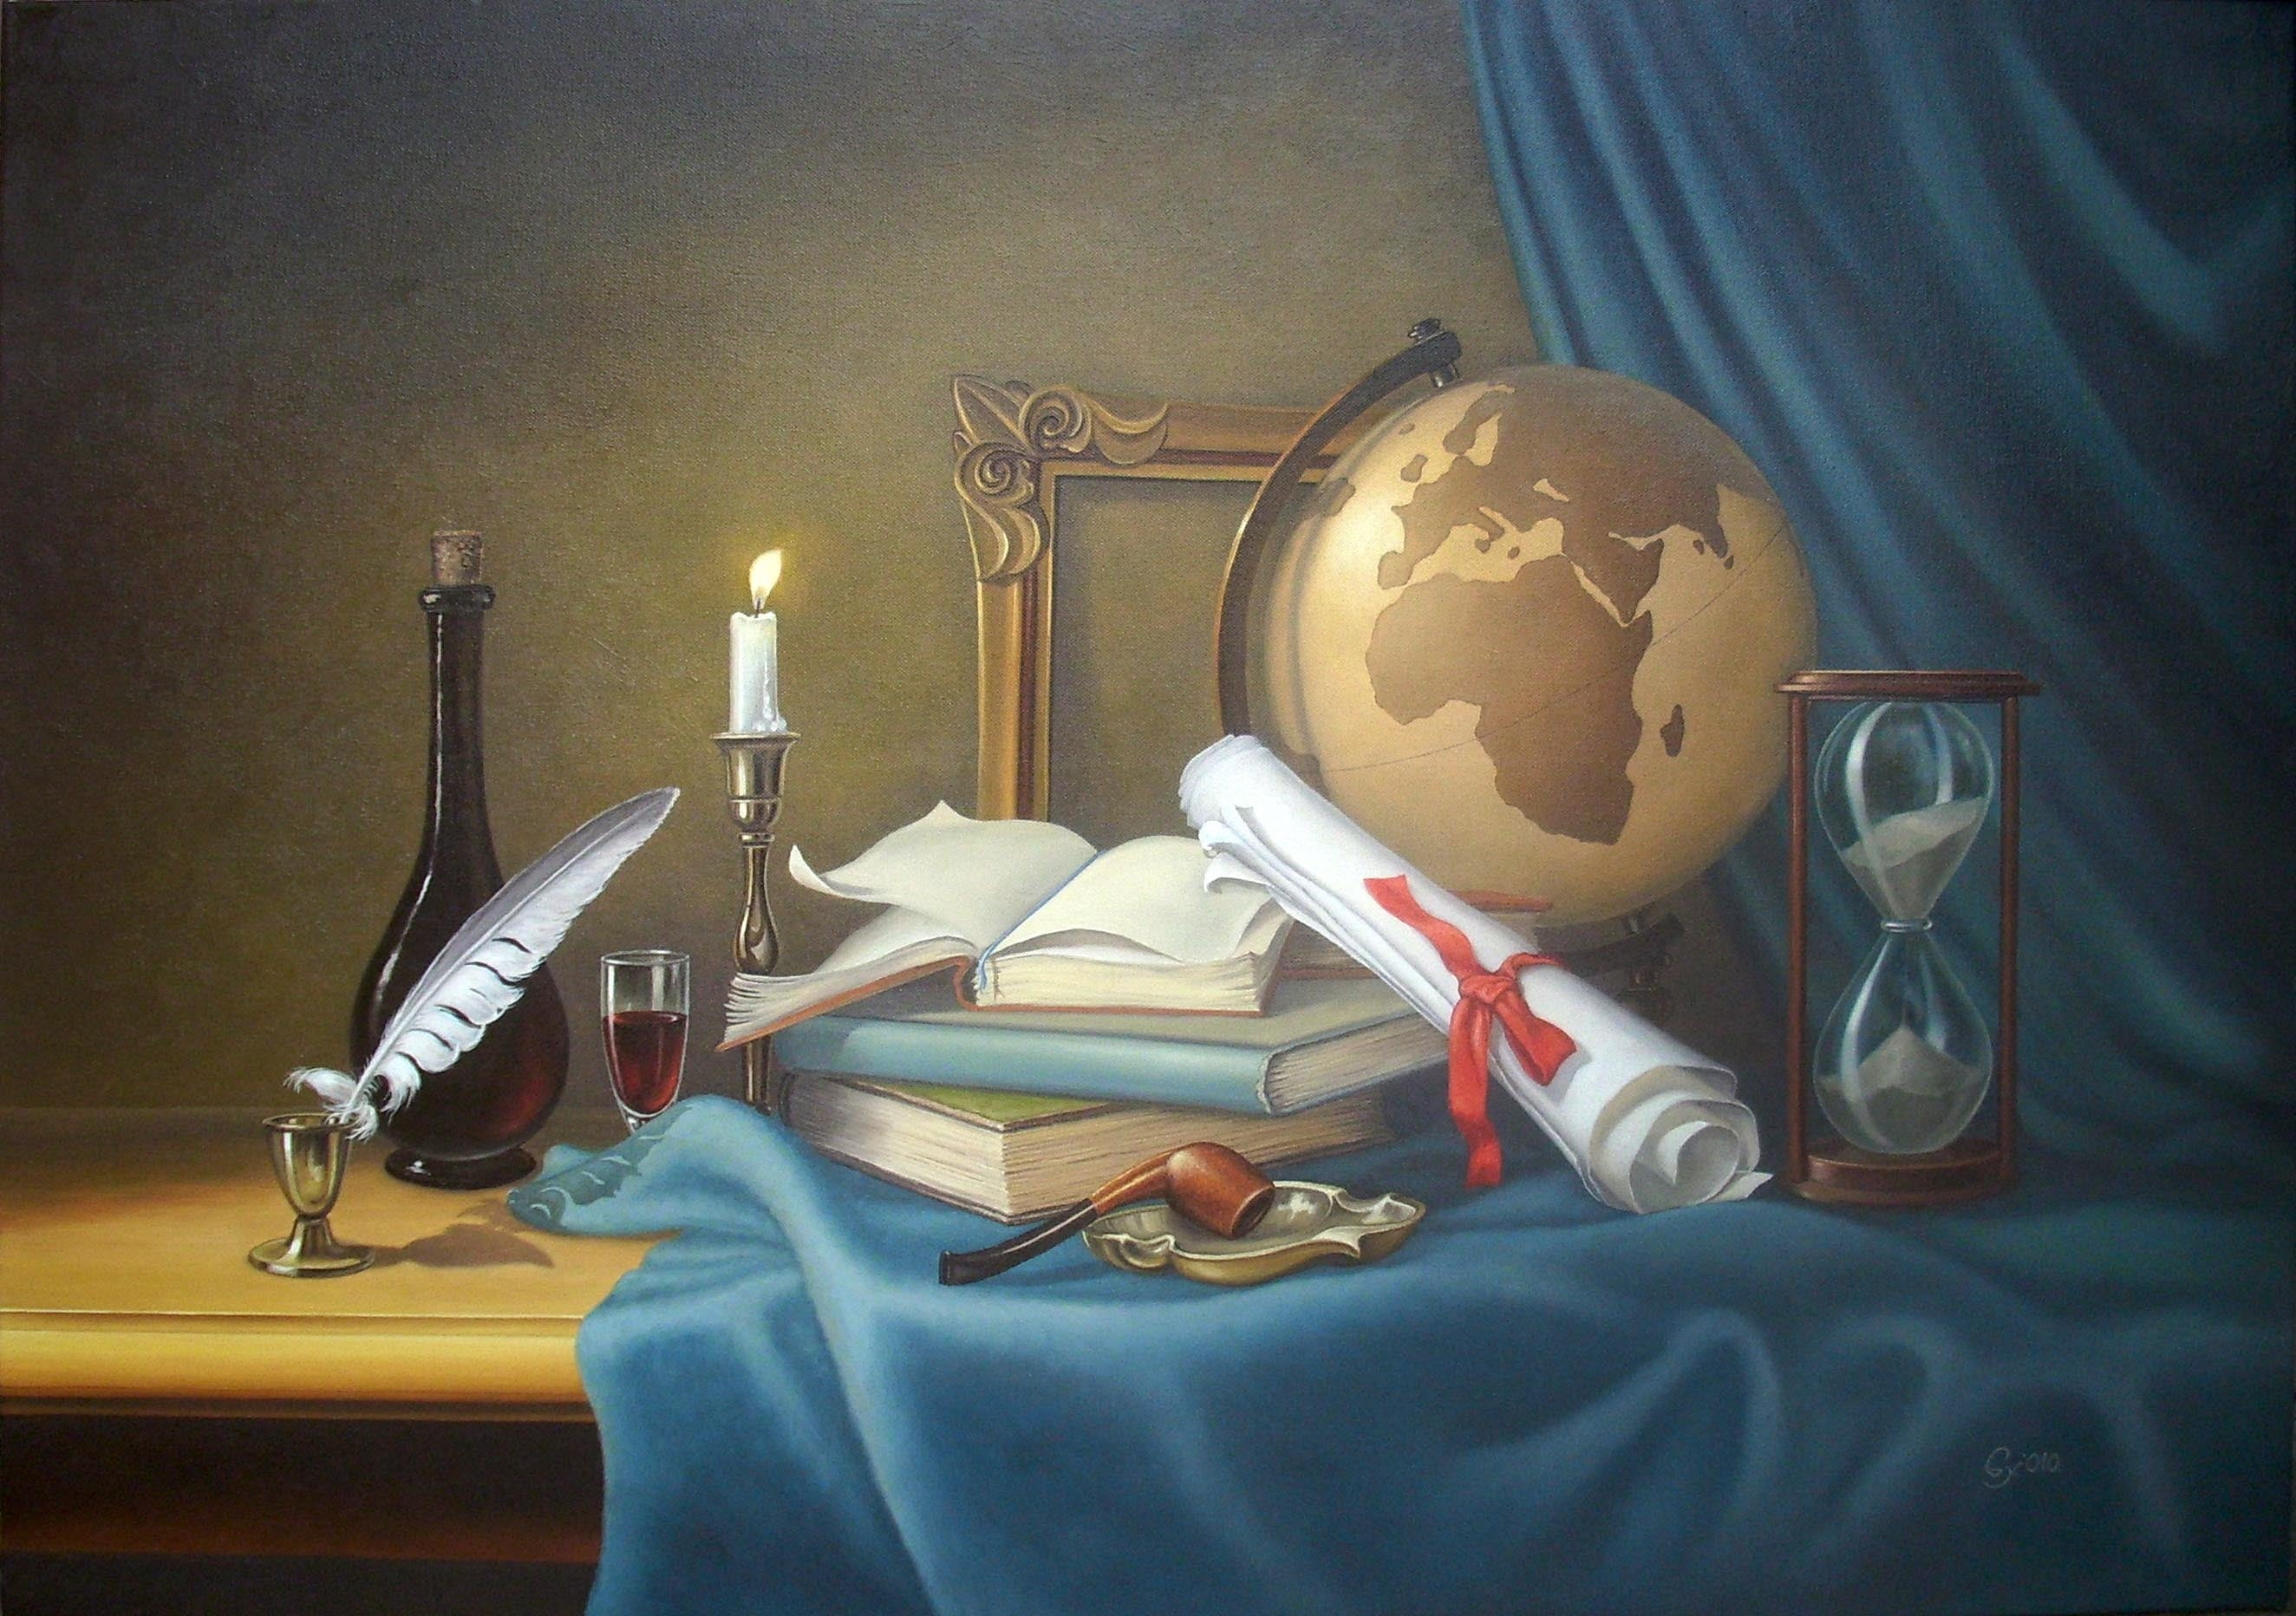 globe and hour glass paintingf, pen, books, candle, tube, still life